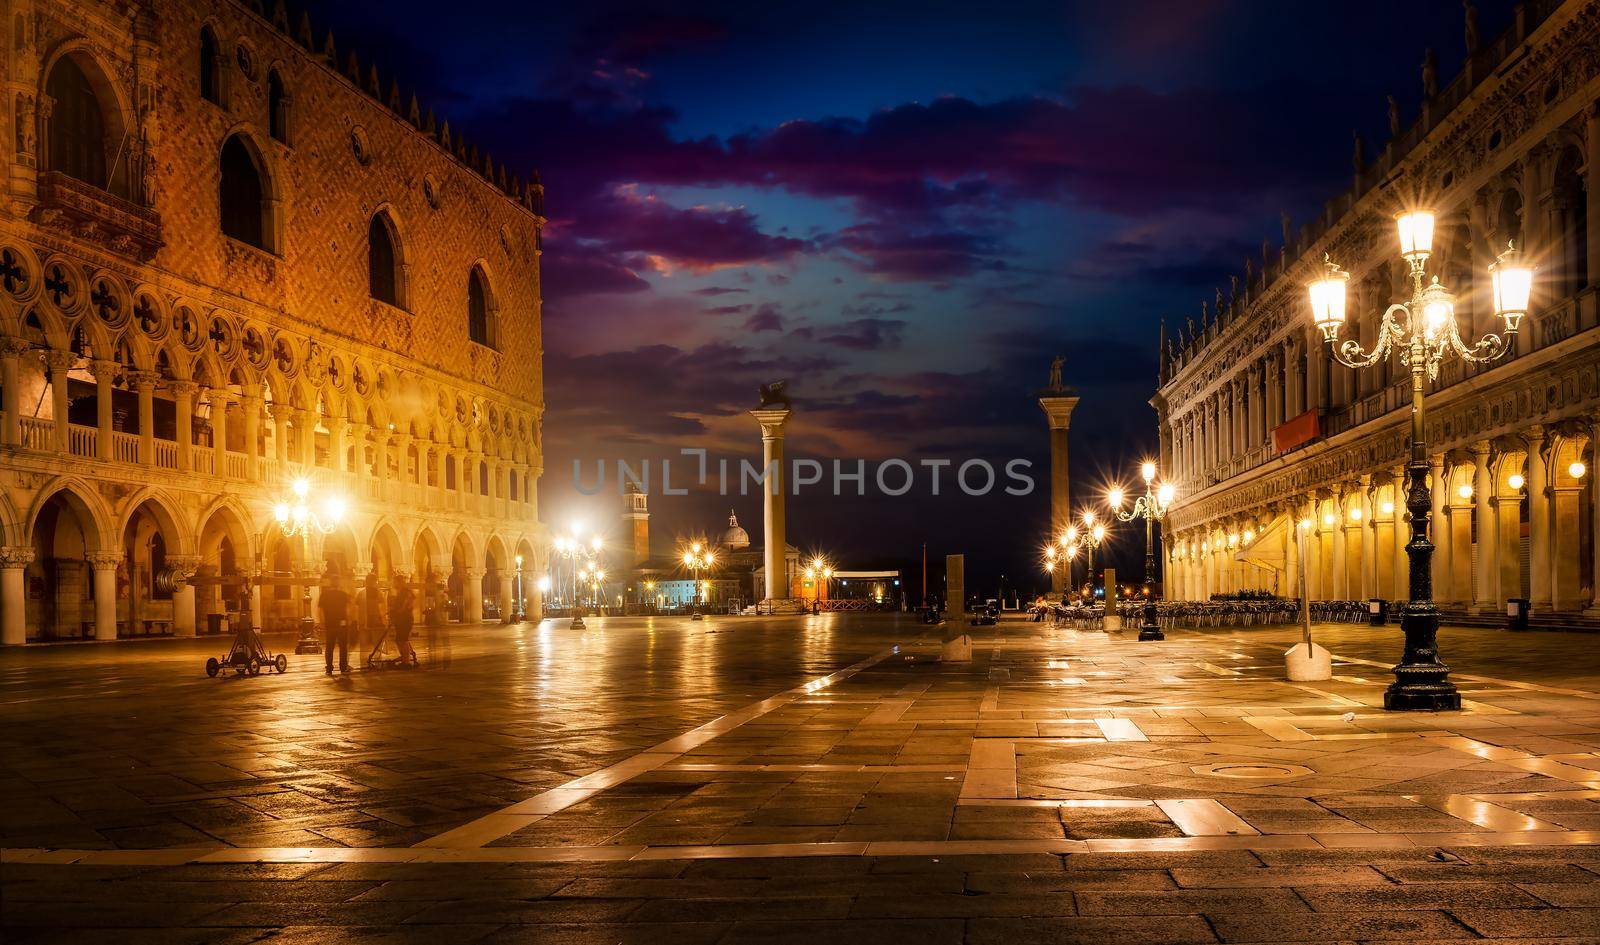 Lighting in Venice by Givaga